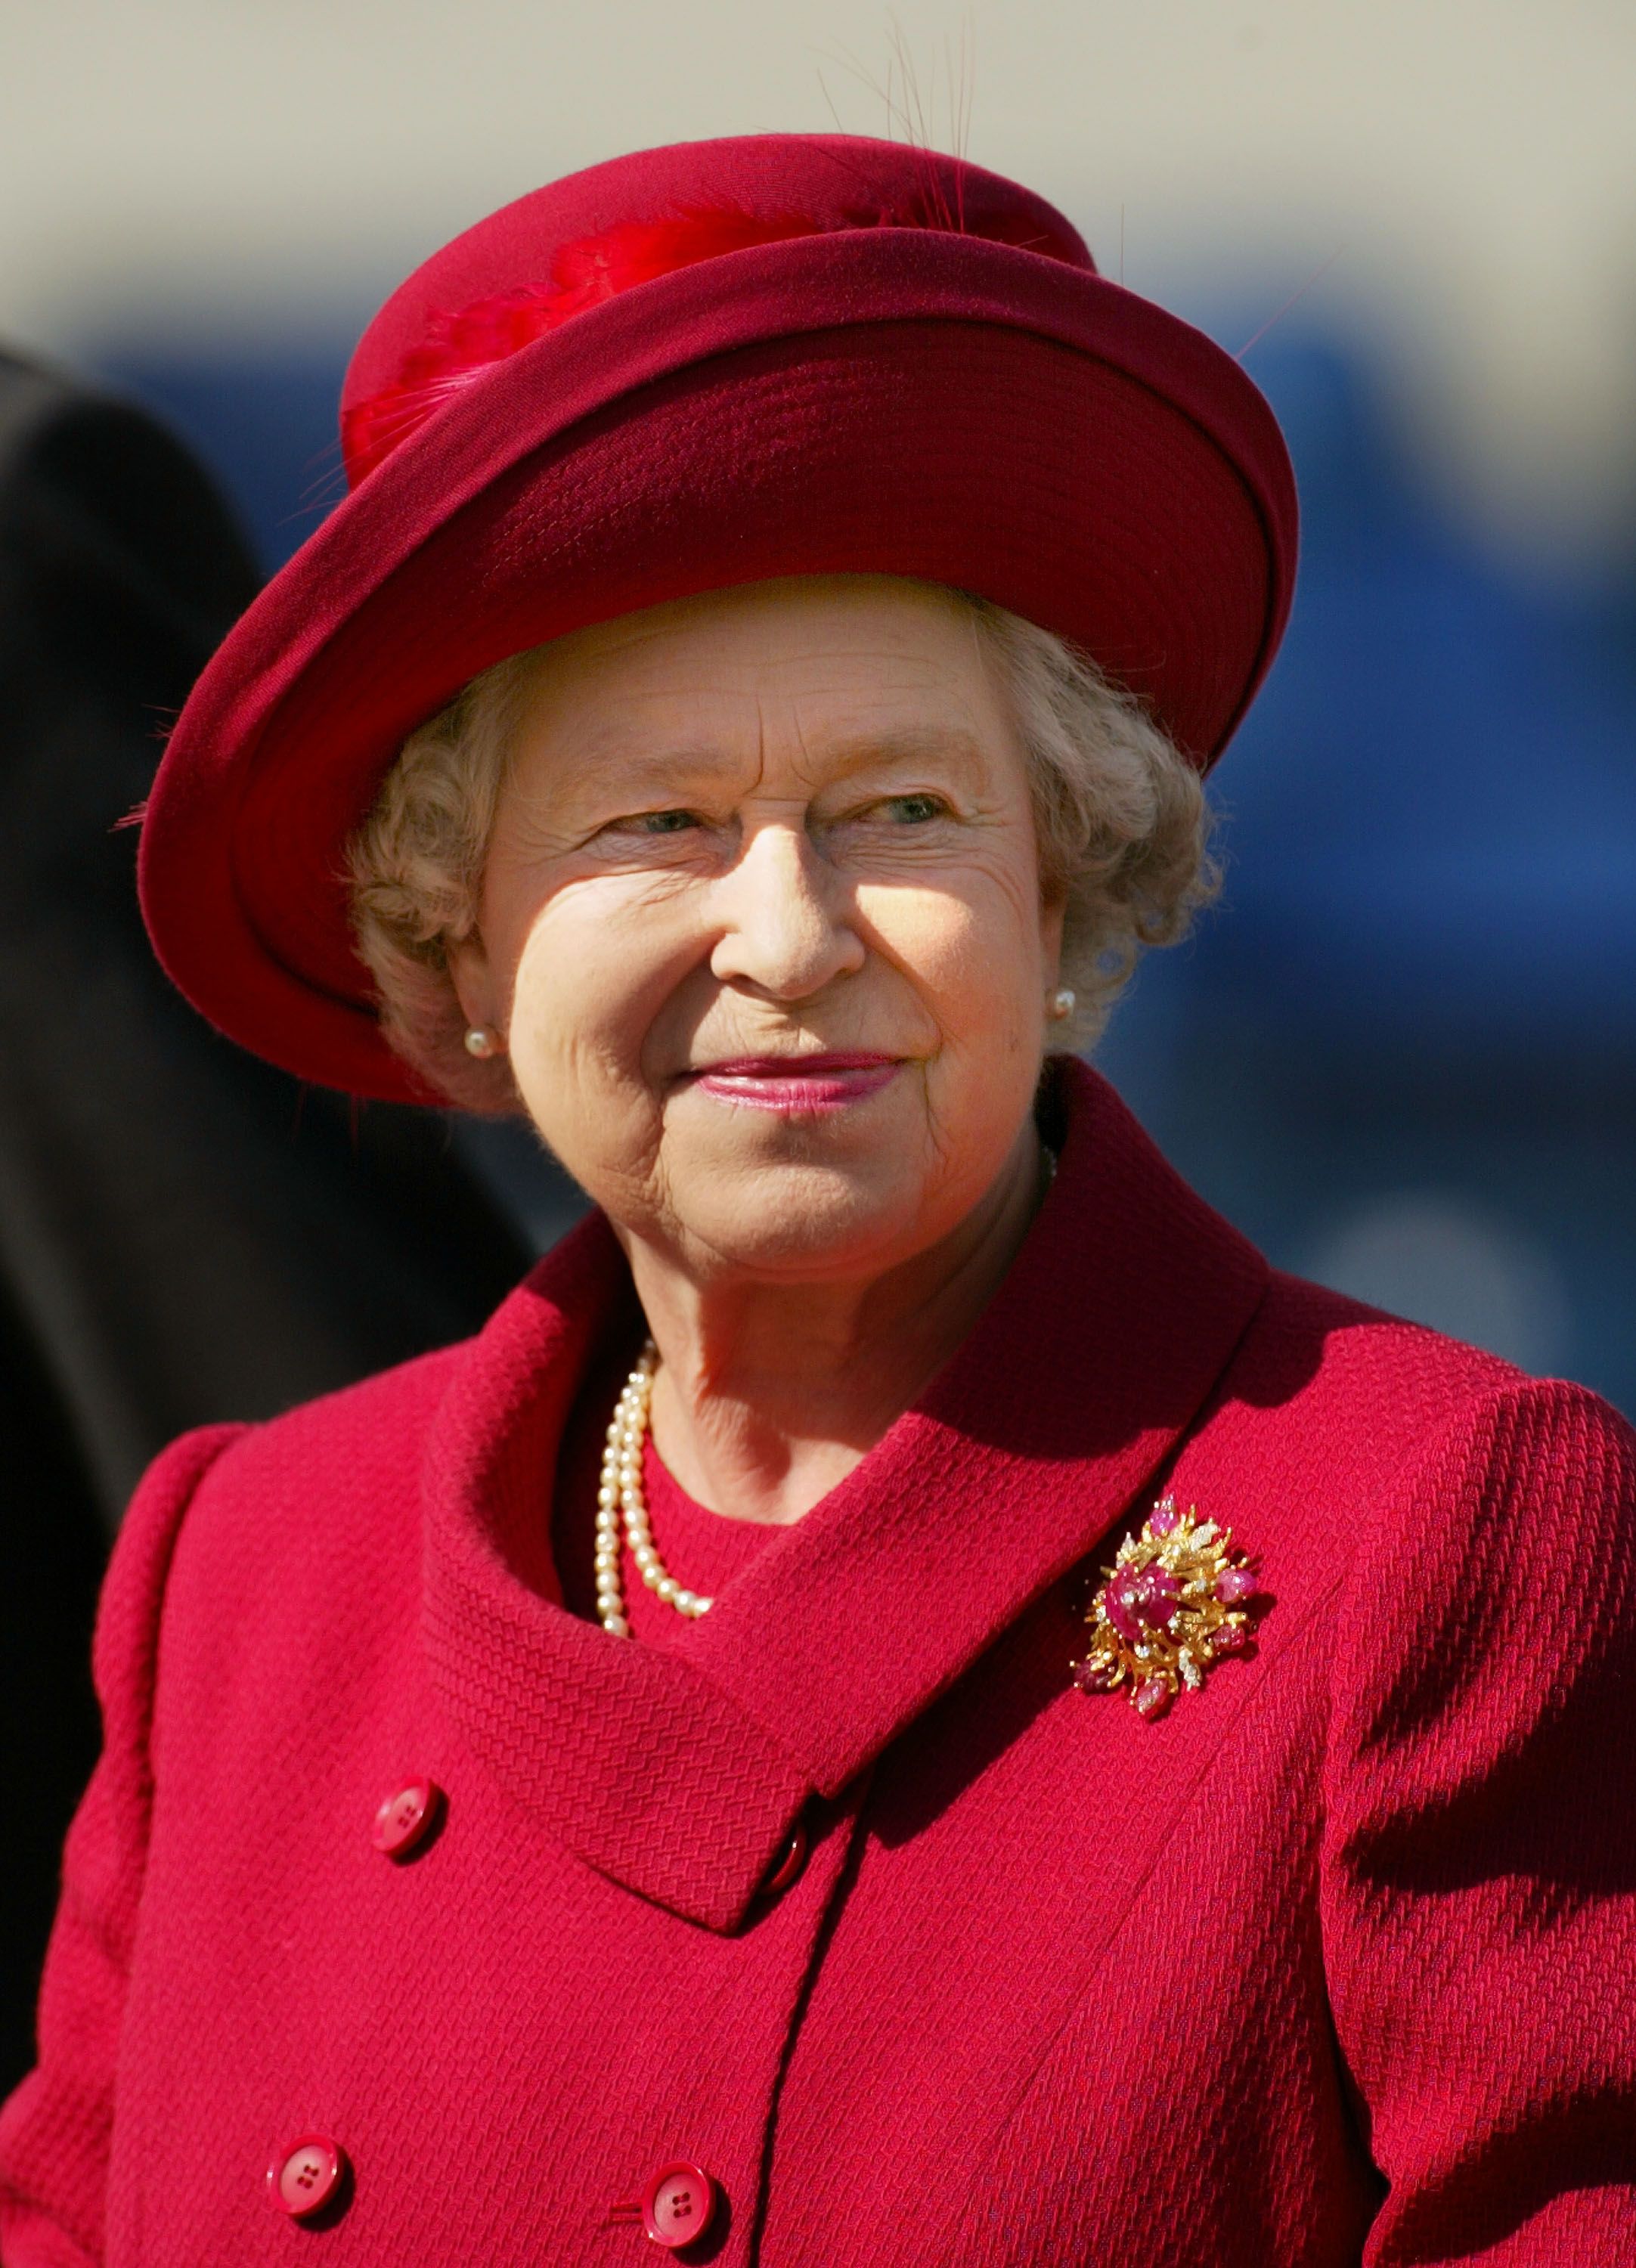 Queen Elizabeth smiles May 18, 2002 after presenting a trophy for the "best turned out trooper" to a Household Cavalry soldier at The Royal Windsor Horse Show at Windsor Great Park, England. | Photo: Getty Images